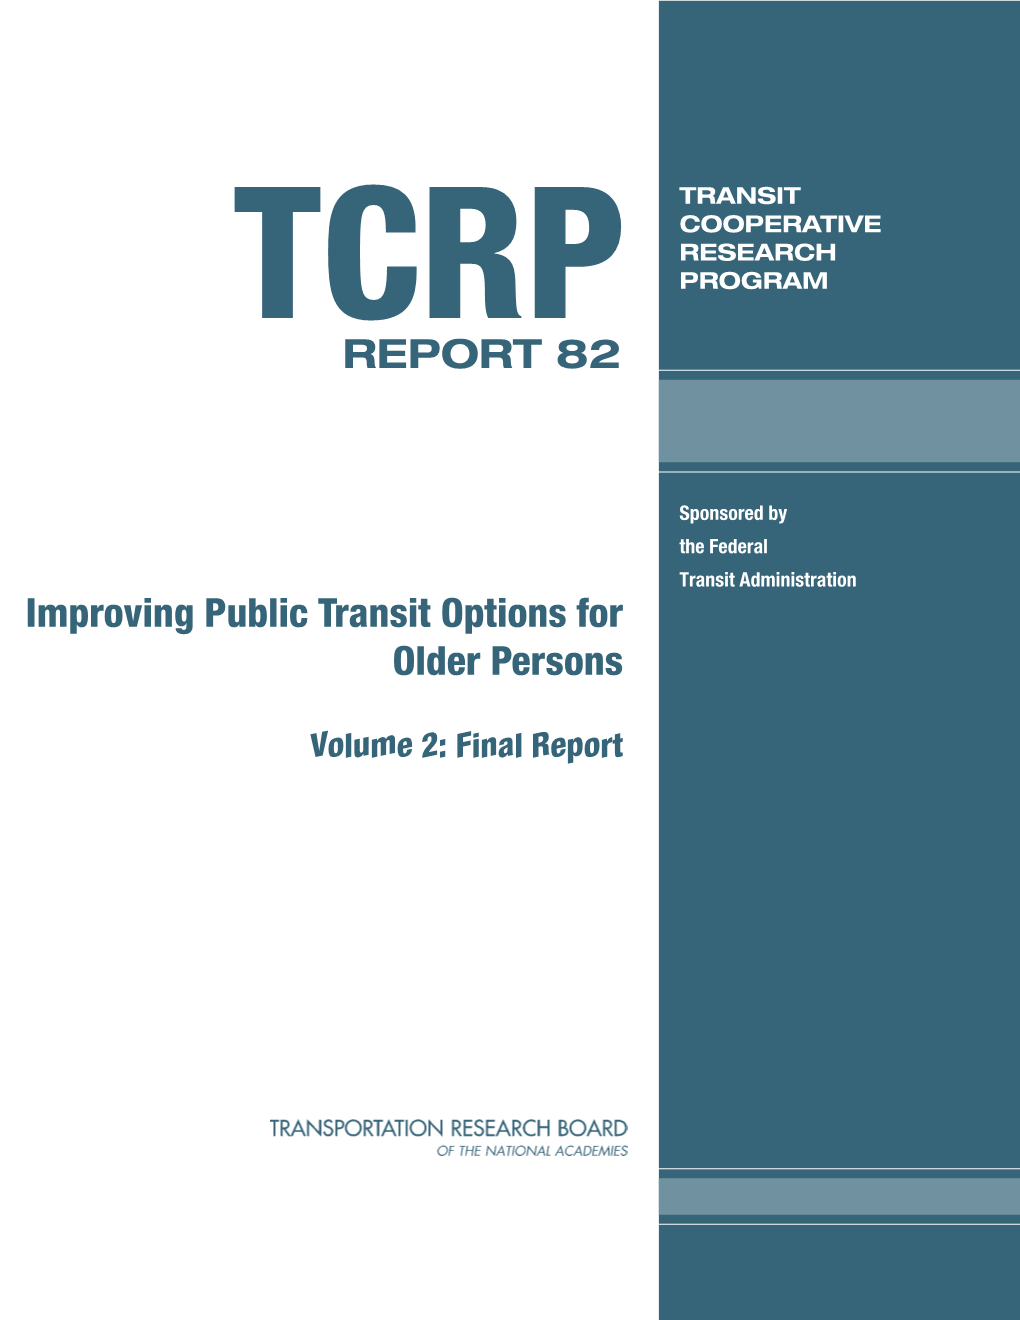 TCRP Report 82 – Improving Public Transit Options for Older Persons